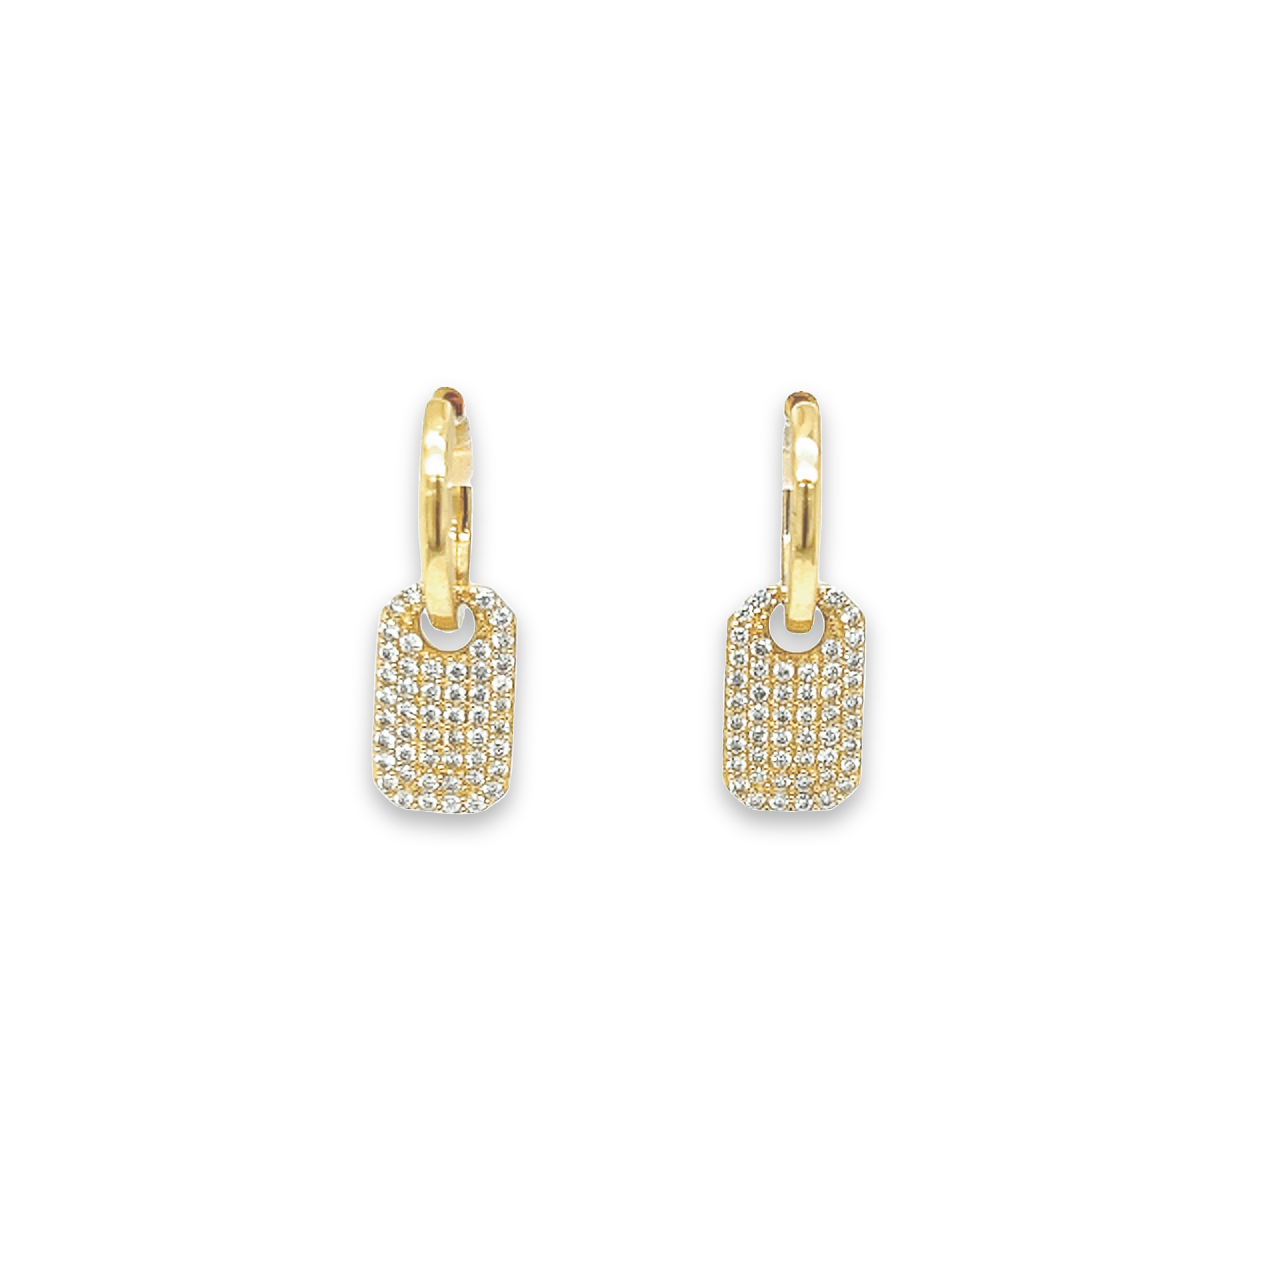 Featured image for “Diamond Dog Tag Earrings”